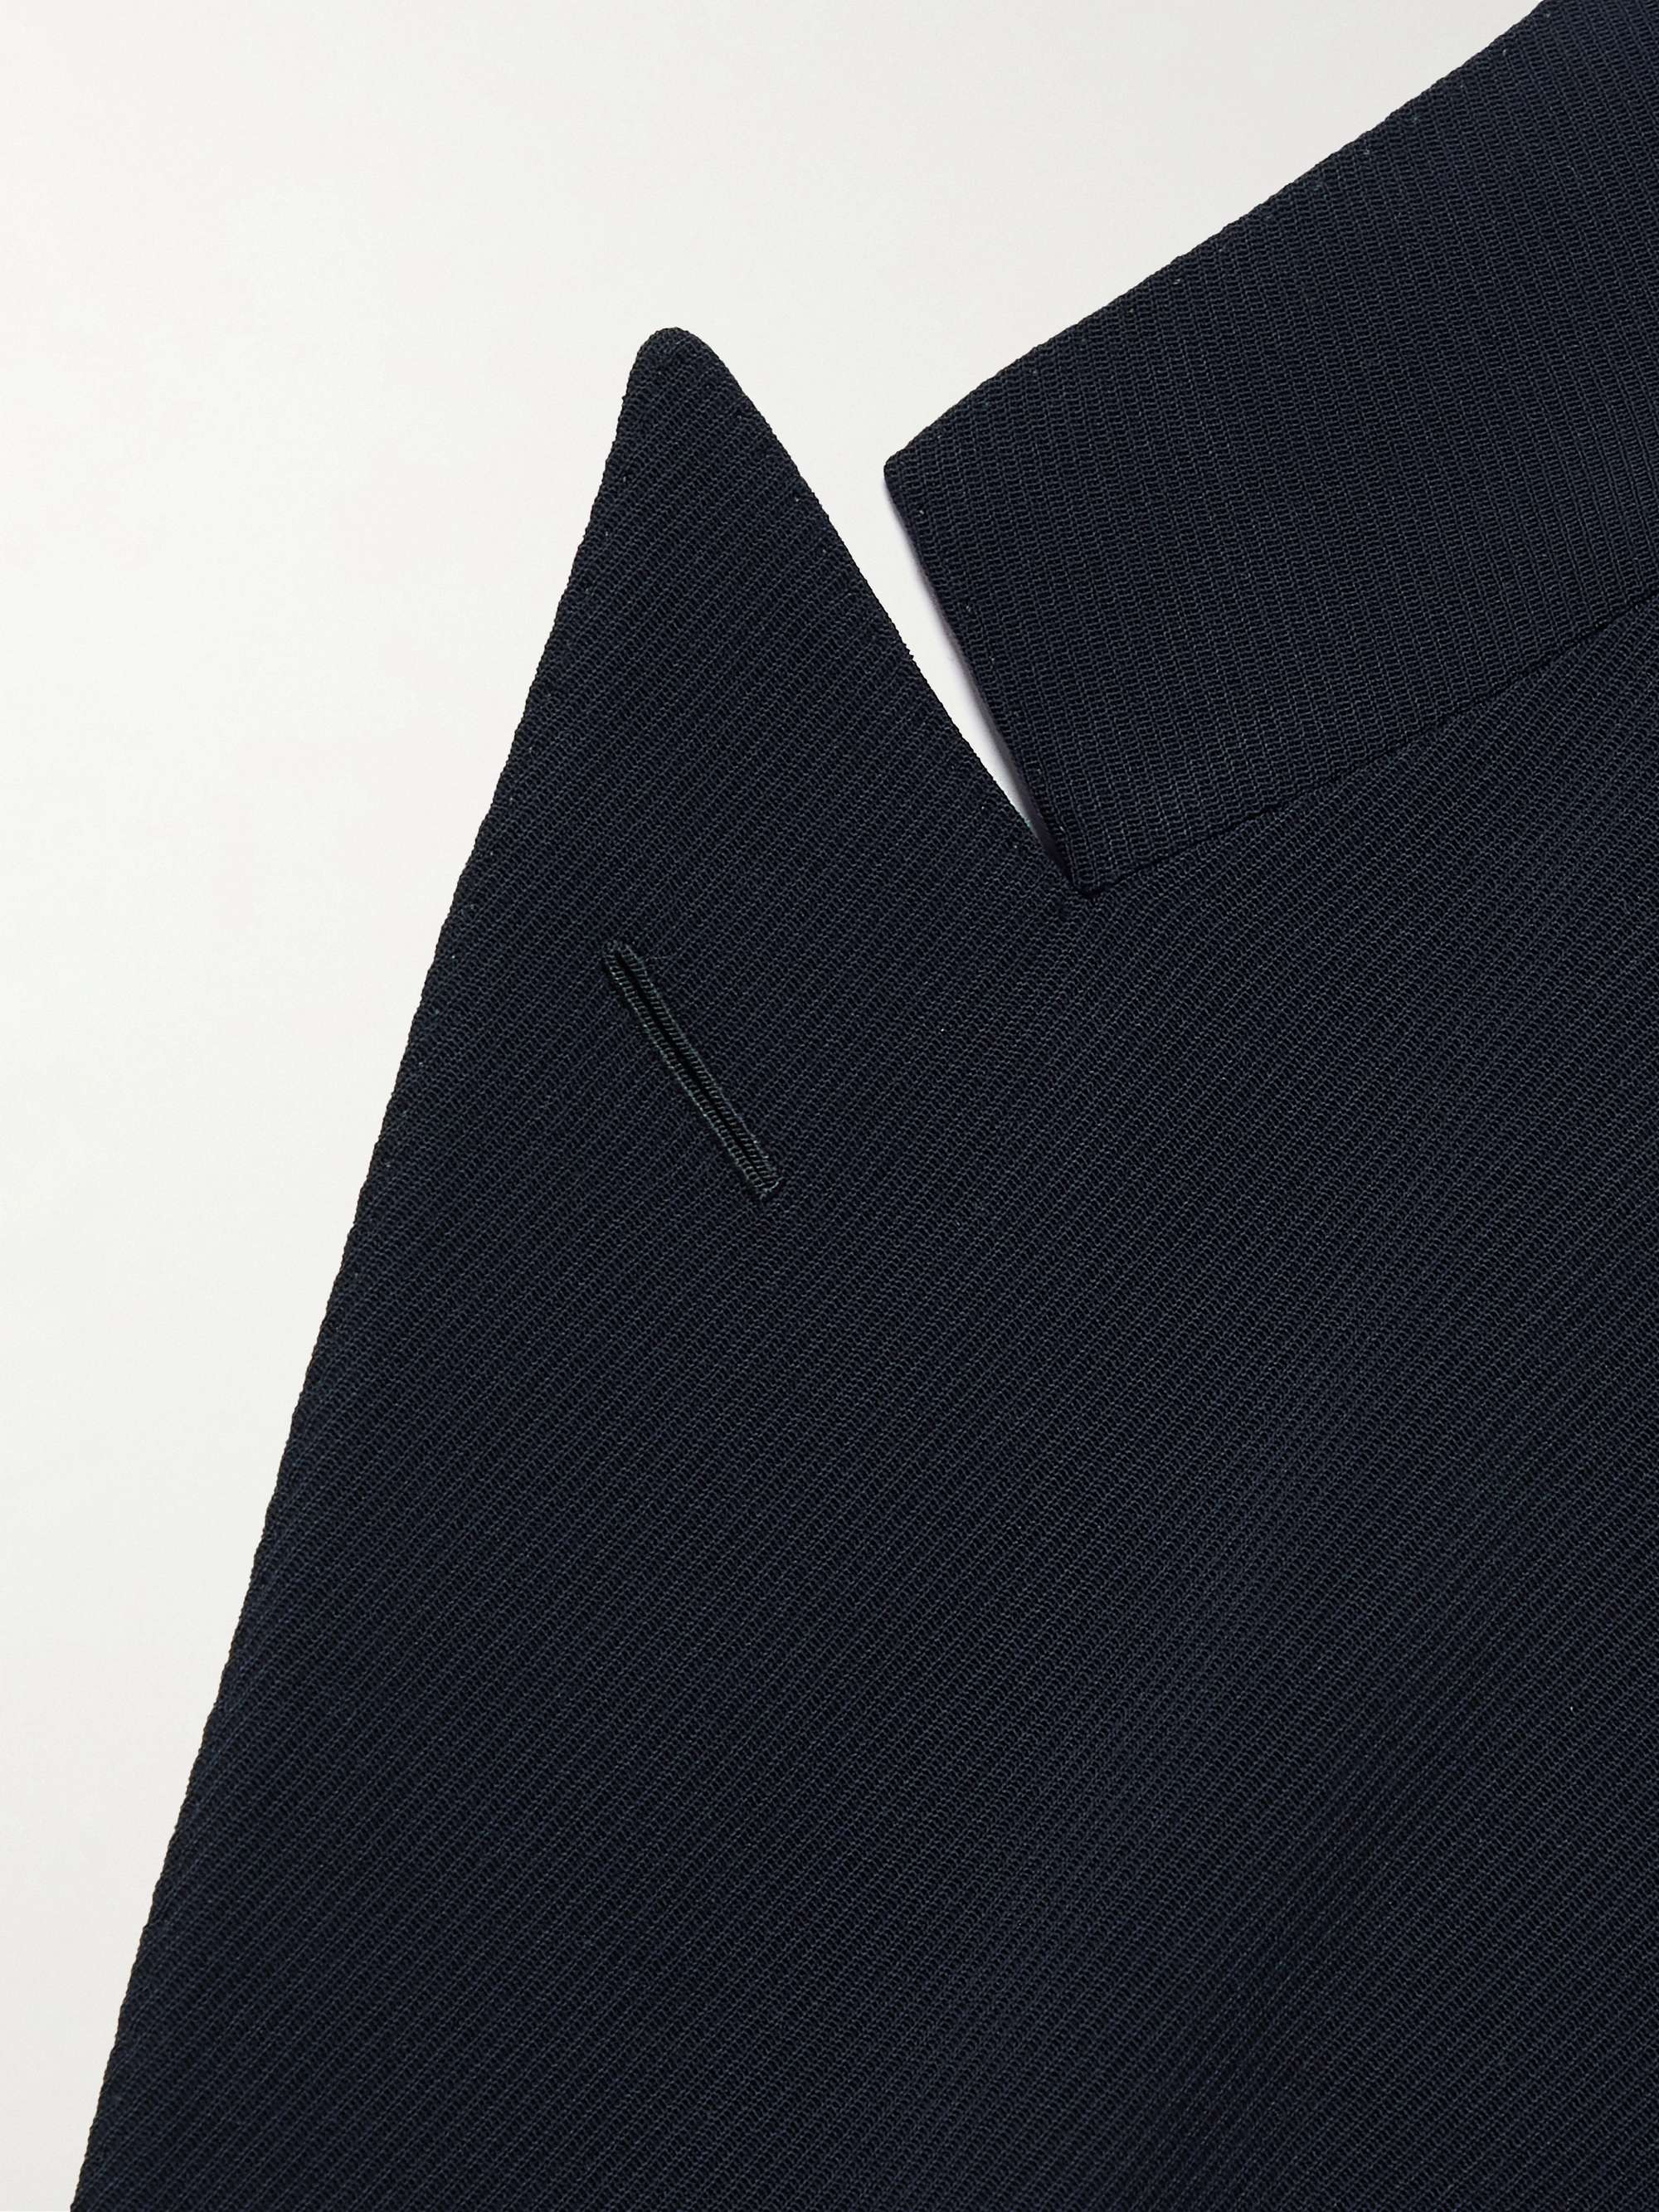 Navy Milano Double-Breasted Wool-Twill Suit Jacket | LORO PIANA | MR PORTER